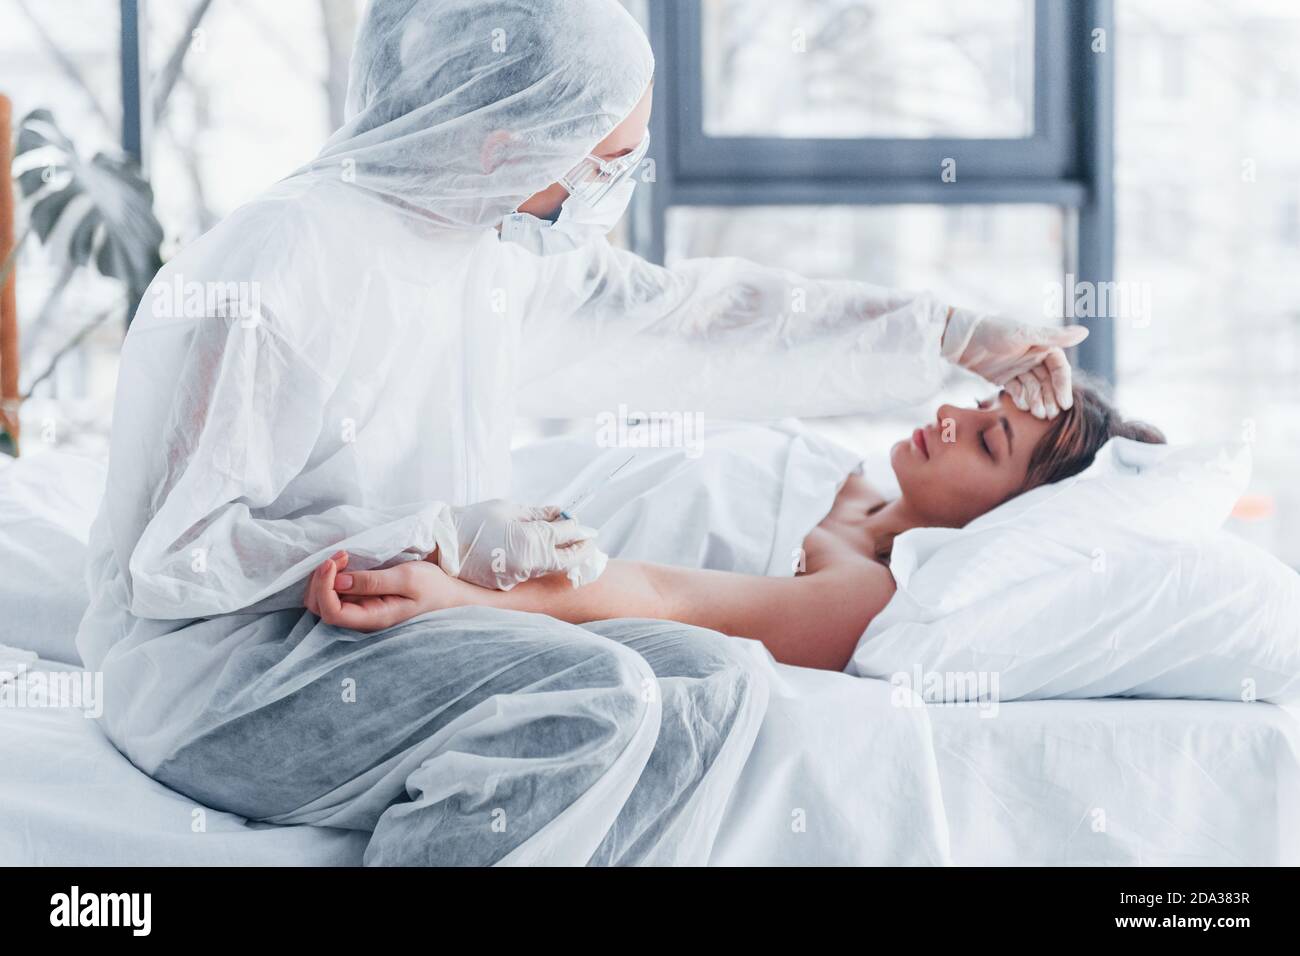 Checks temperature. Female doctor in defensive lab coat and protective eyewear with syringe in hand injecting medicine to young girl sick of virus Stock Photo